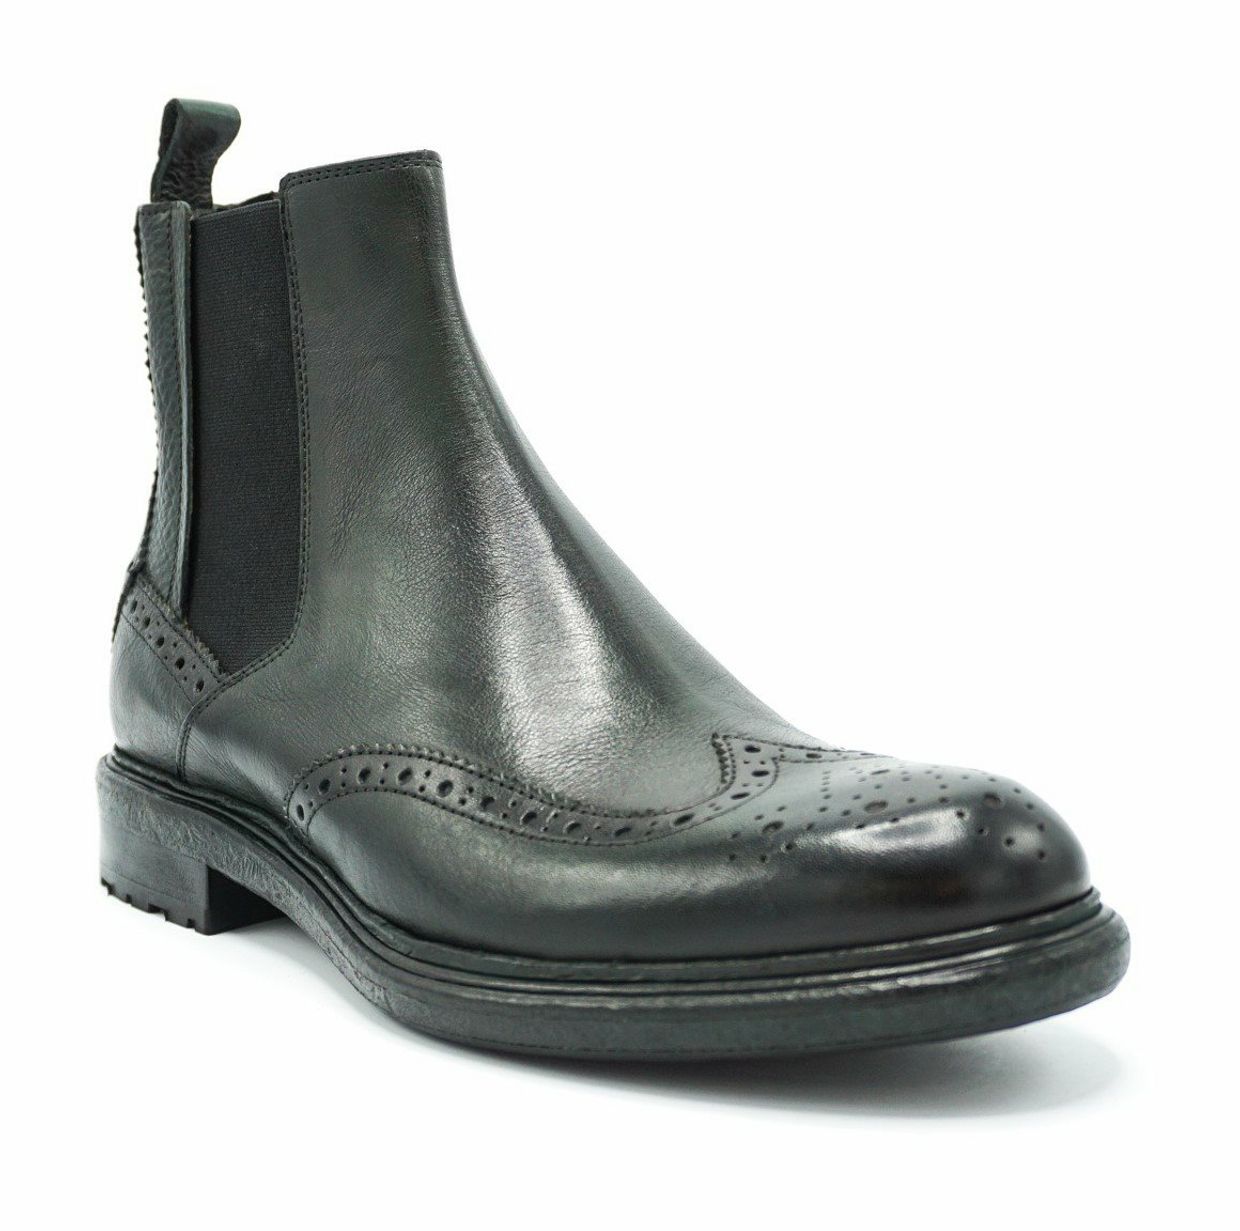 Crispiniano chelseaboot